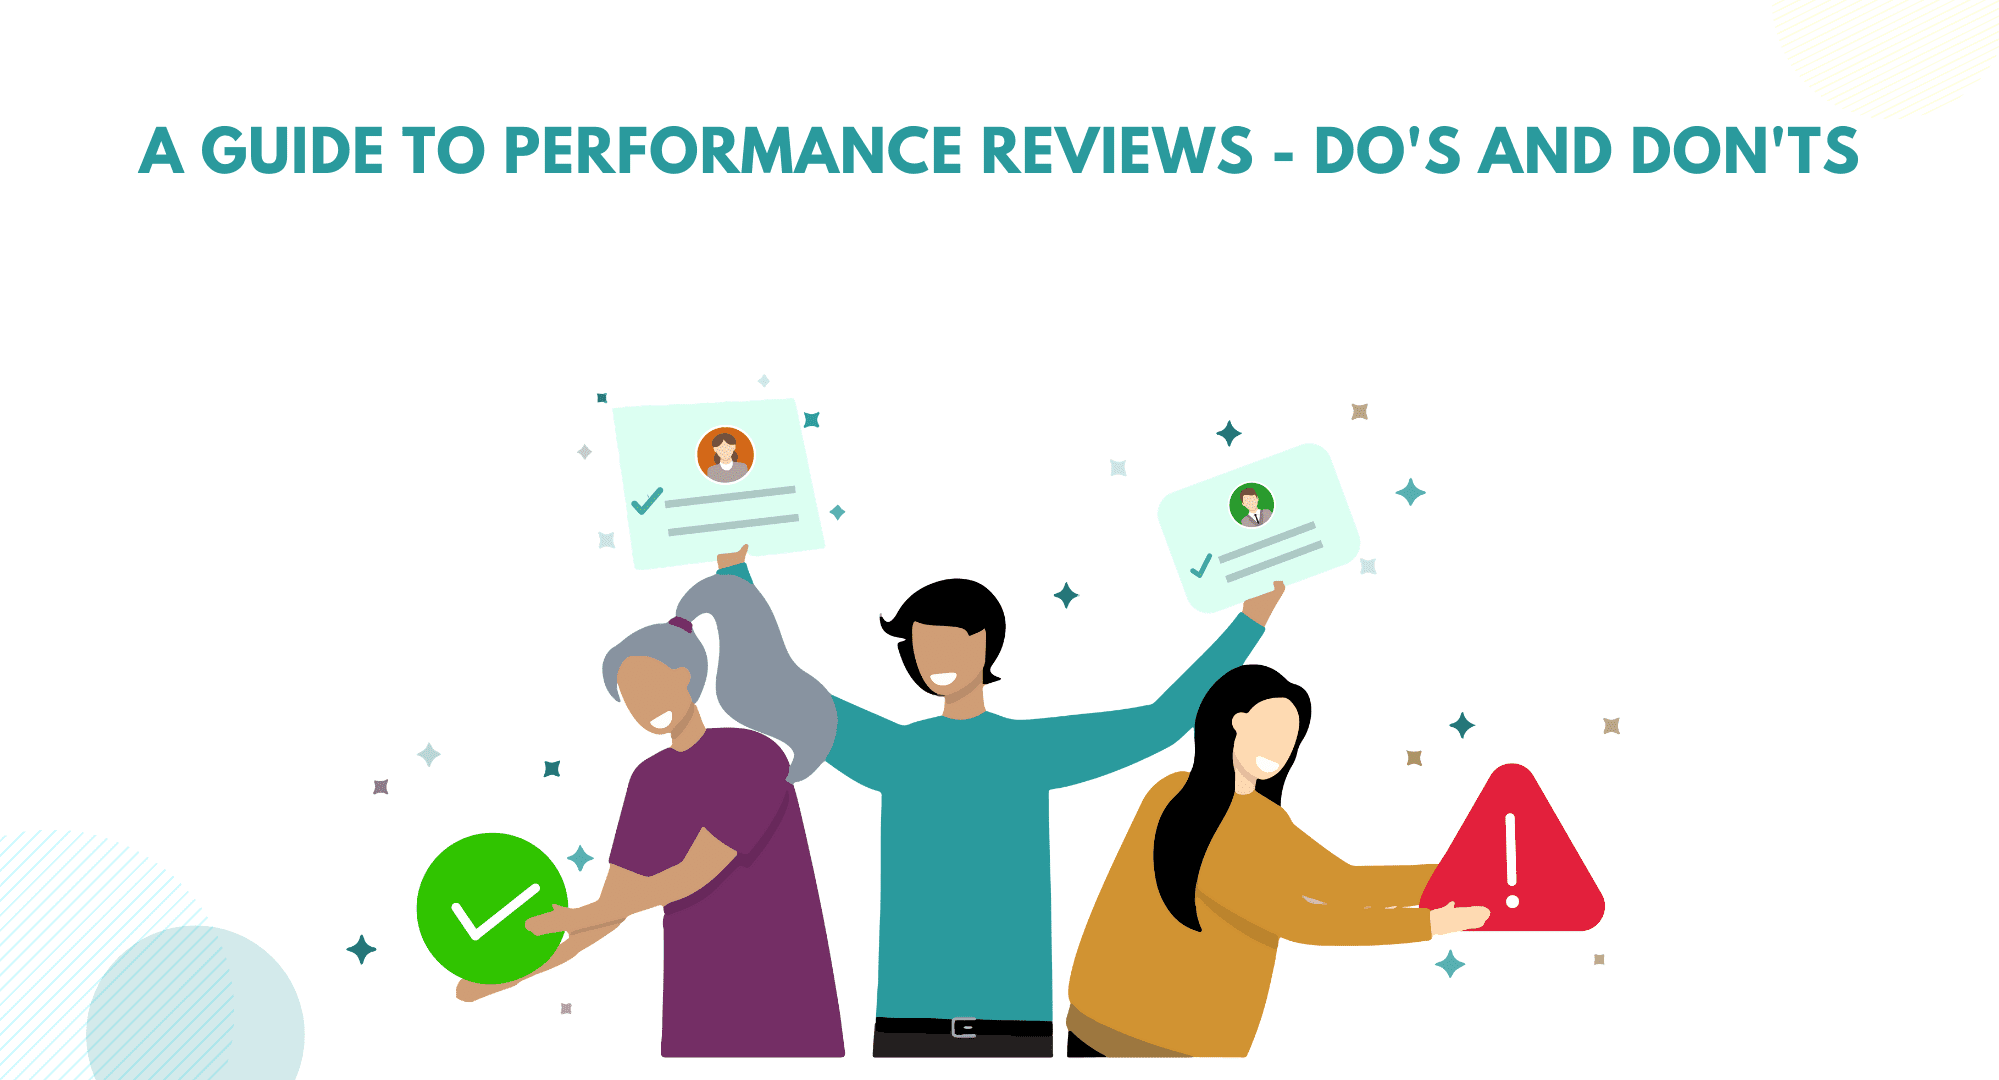 Tips to give performance reviews. How to give performance reviews. A guide to performance reviews. Dos and don'ts of performance reviews. Tips on how to give performance reviews. How to give performance appraisals.